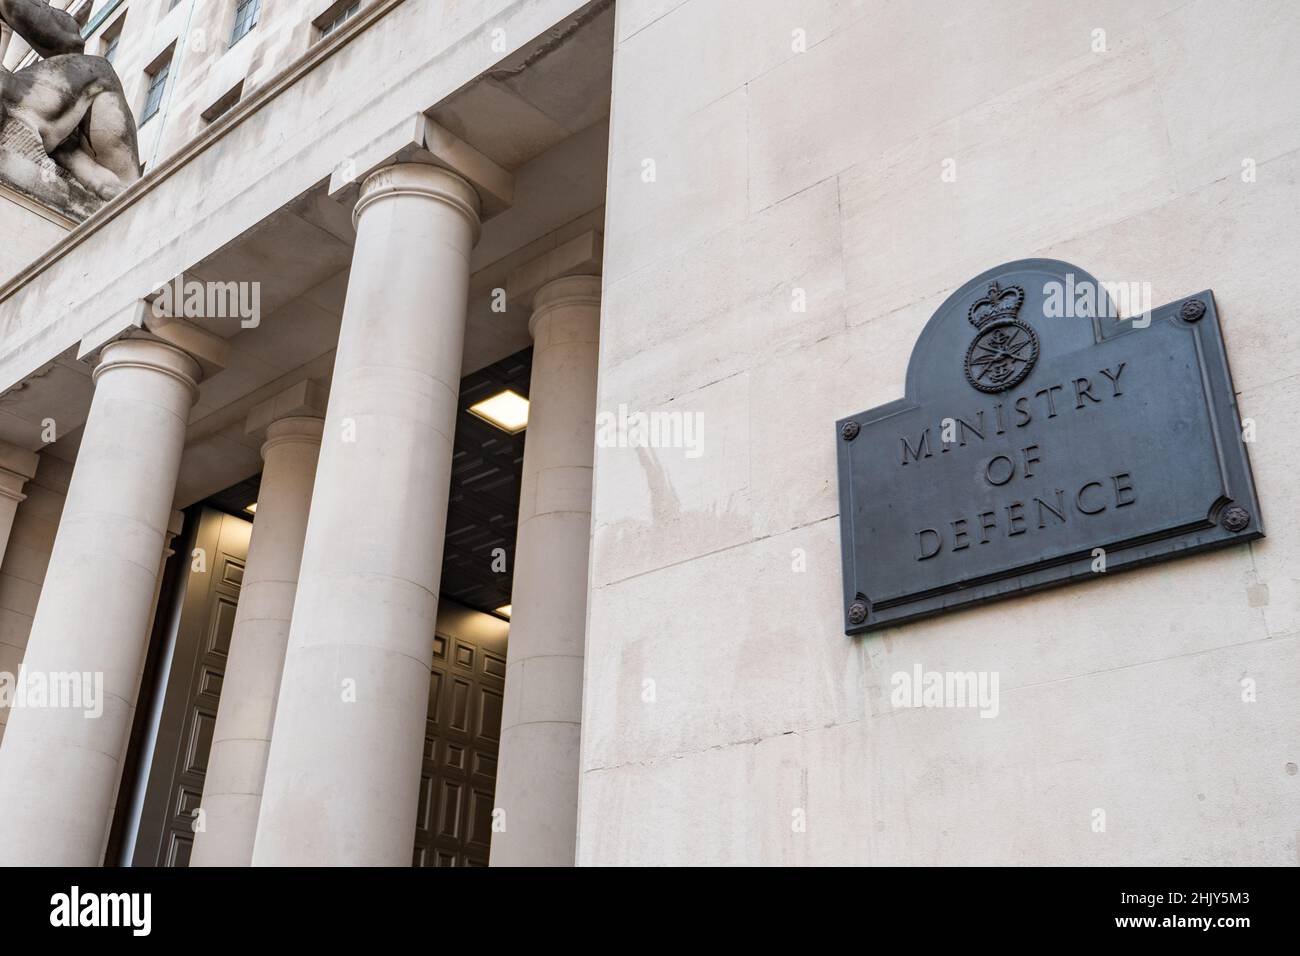 Ministry of Defence, London. Signage to the UK government military department known as the MOD in Whitehall, the heart of UK politics and governance. Stock Photo